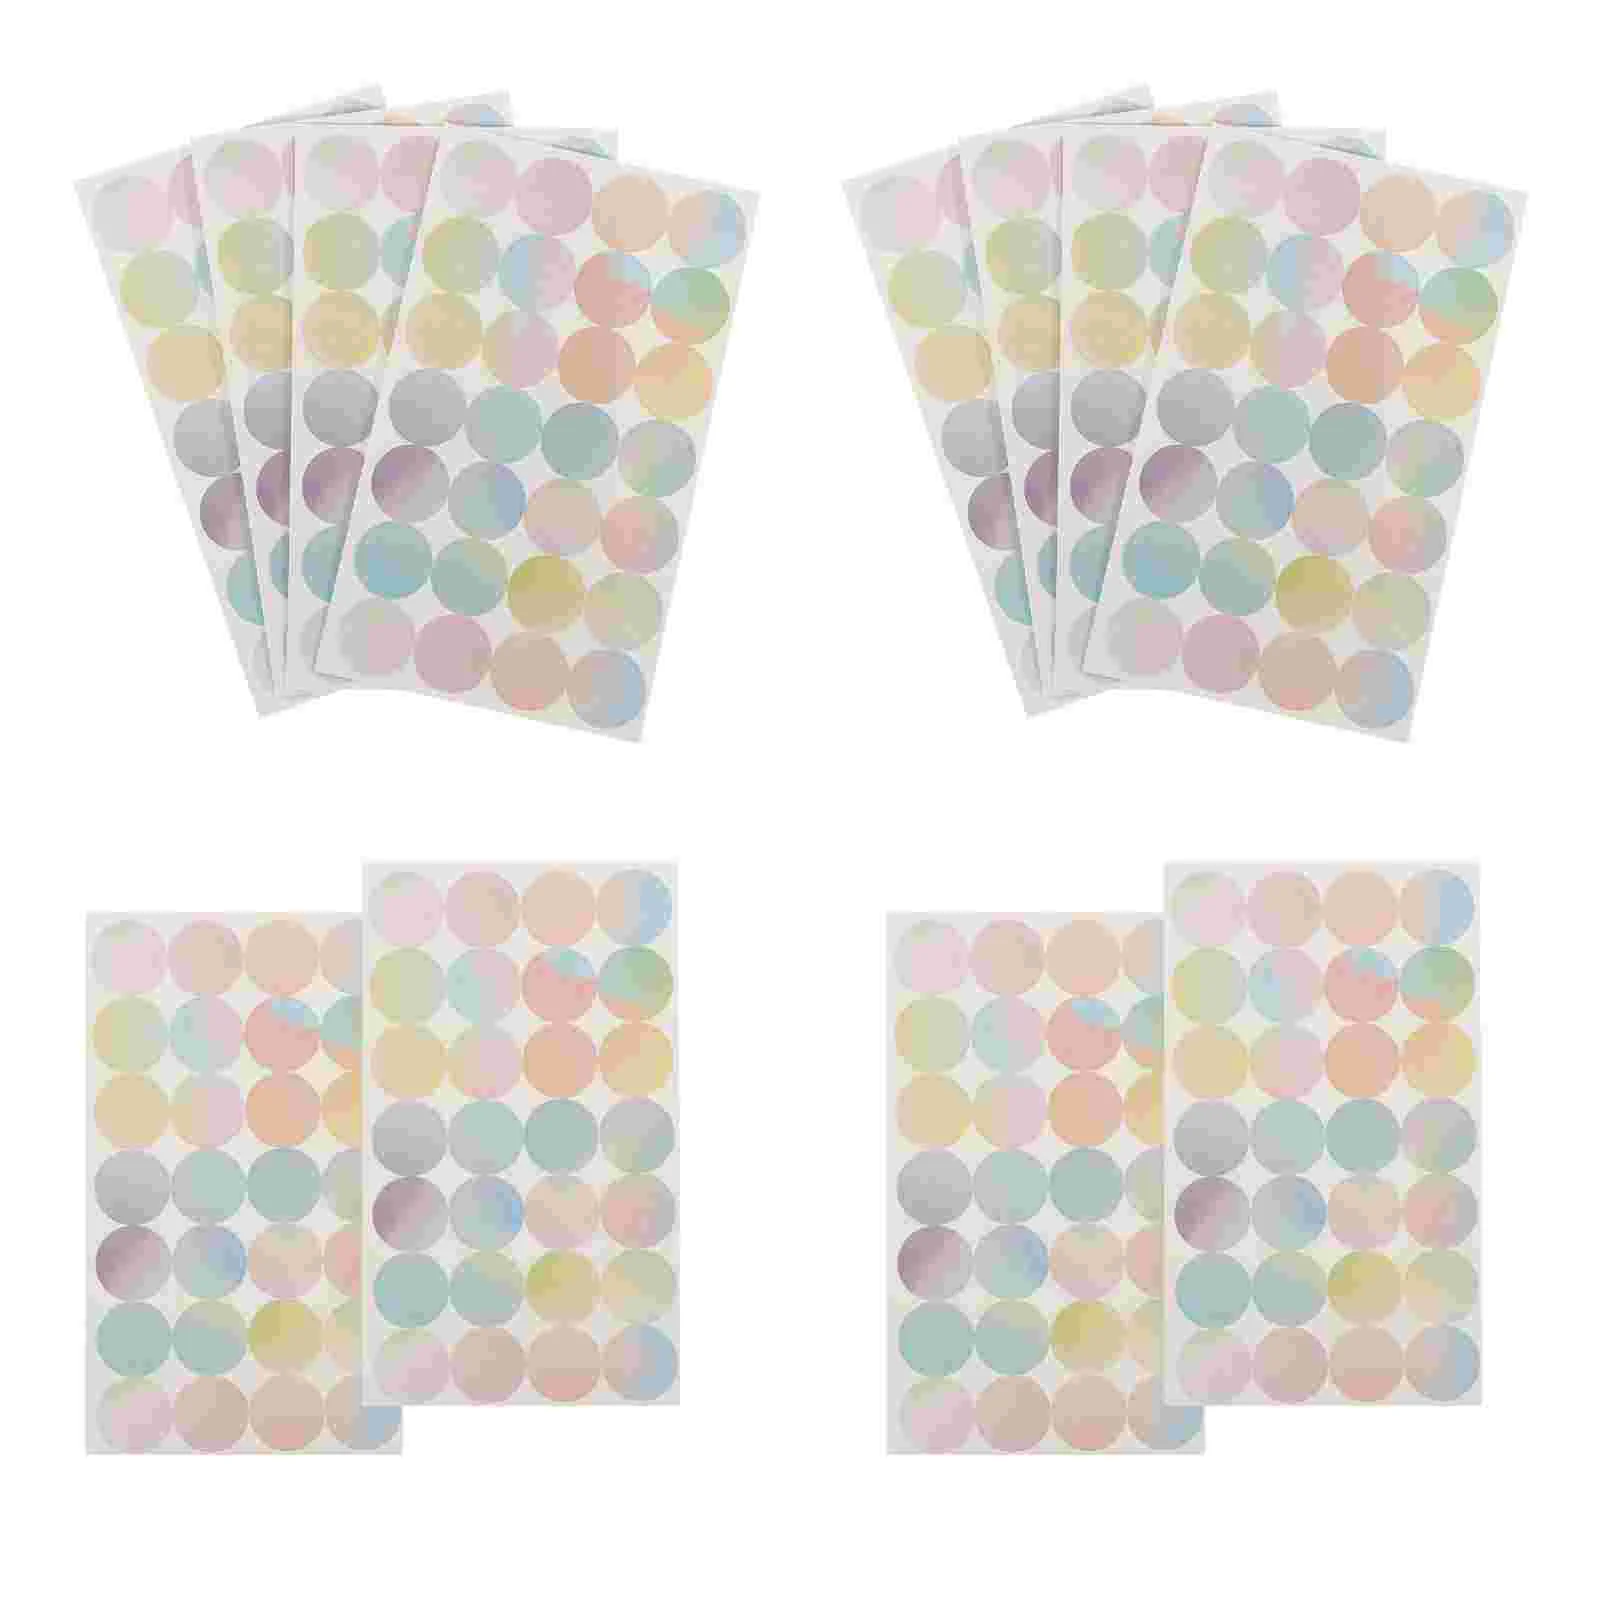 

16 Sheets Binder Ring Sticker Tag Paper Hole Stickers Decorative Reinforcement Reinforcements Punch Repair Note Loose-leaf